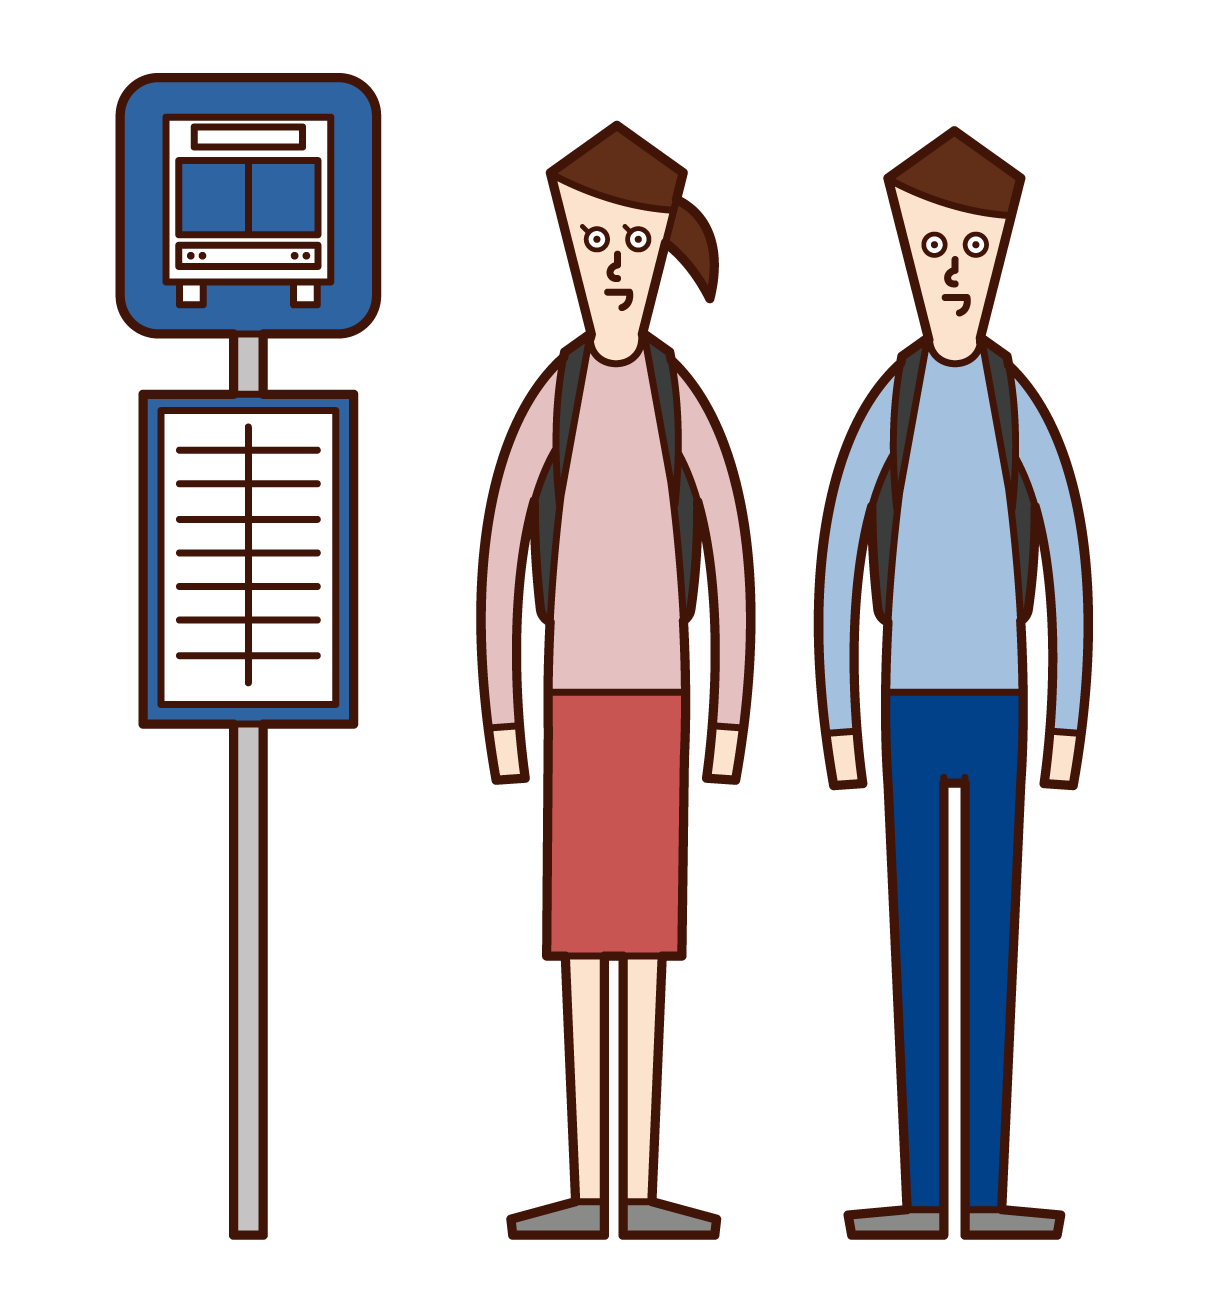 Illustration of people waiting for a bus at a bus stop